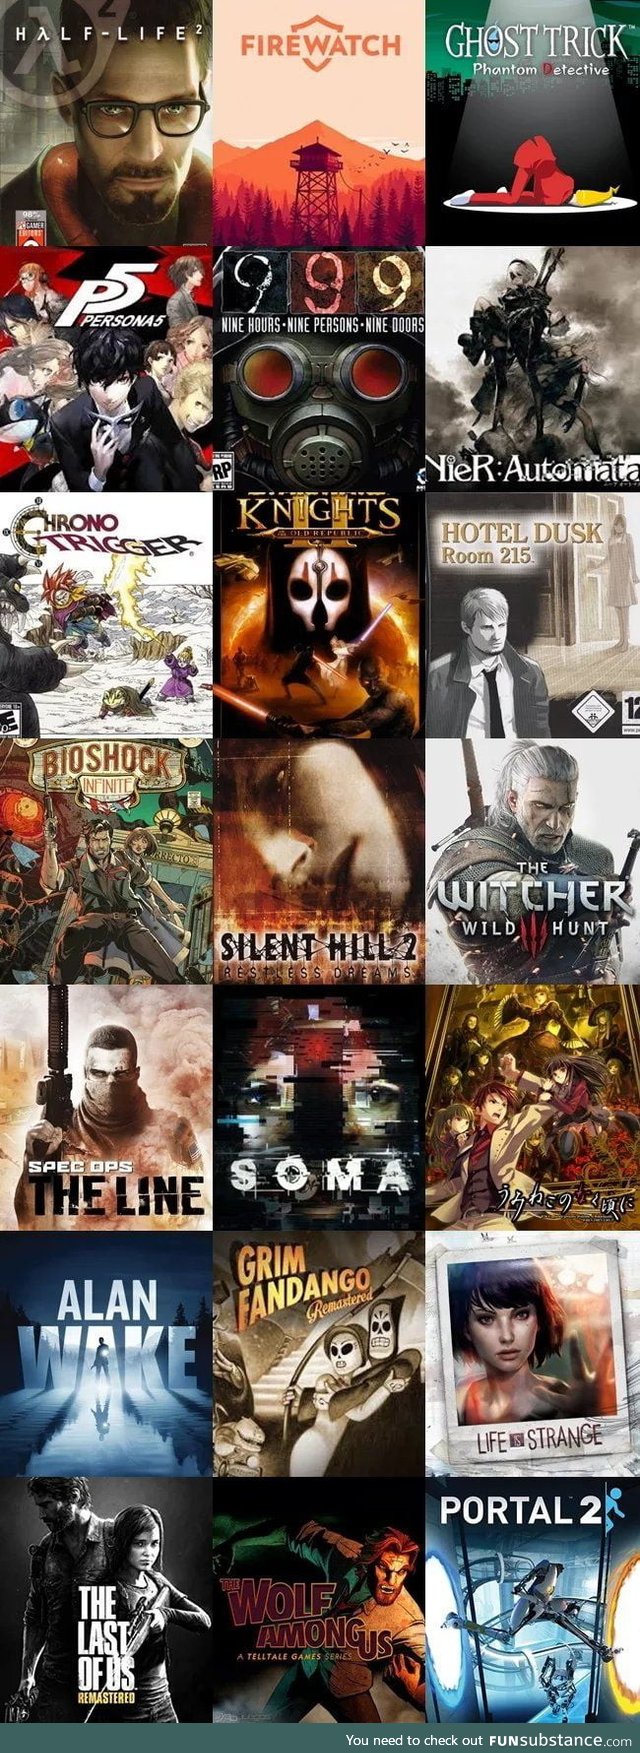 Here are some games with great stories